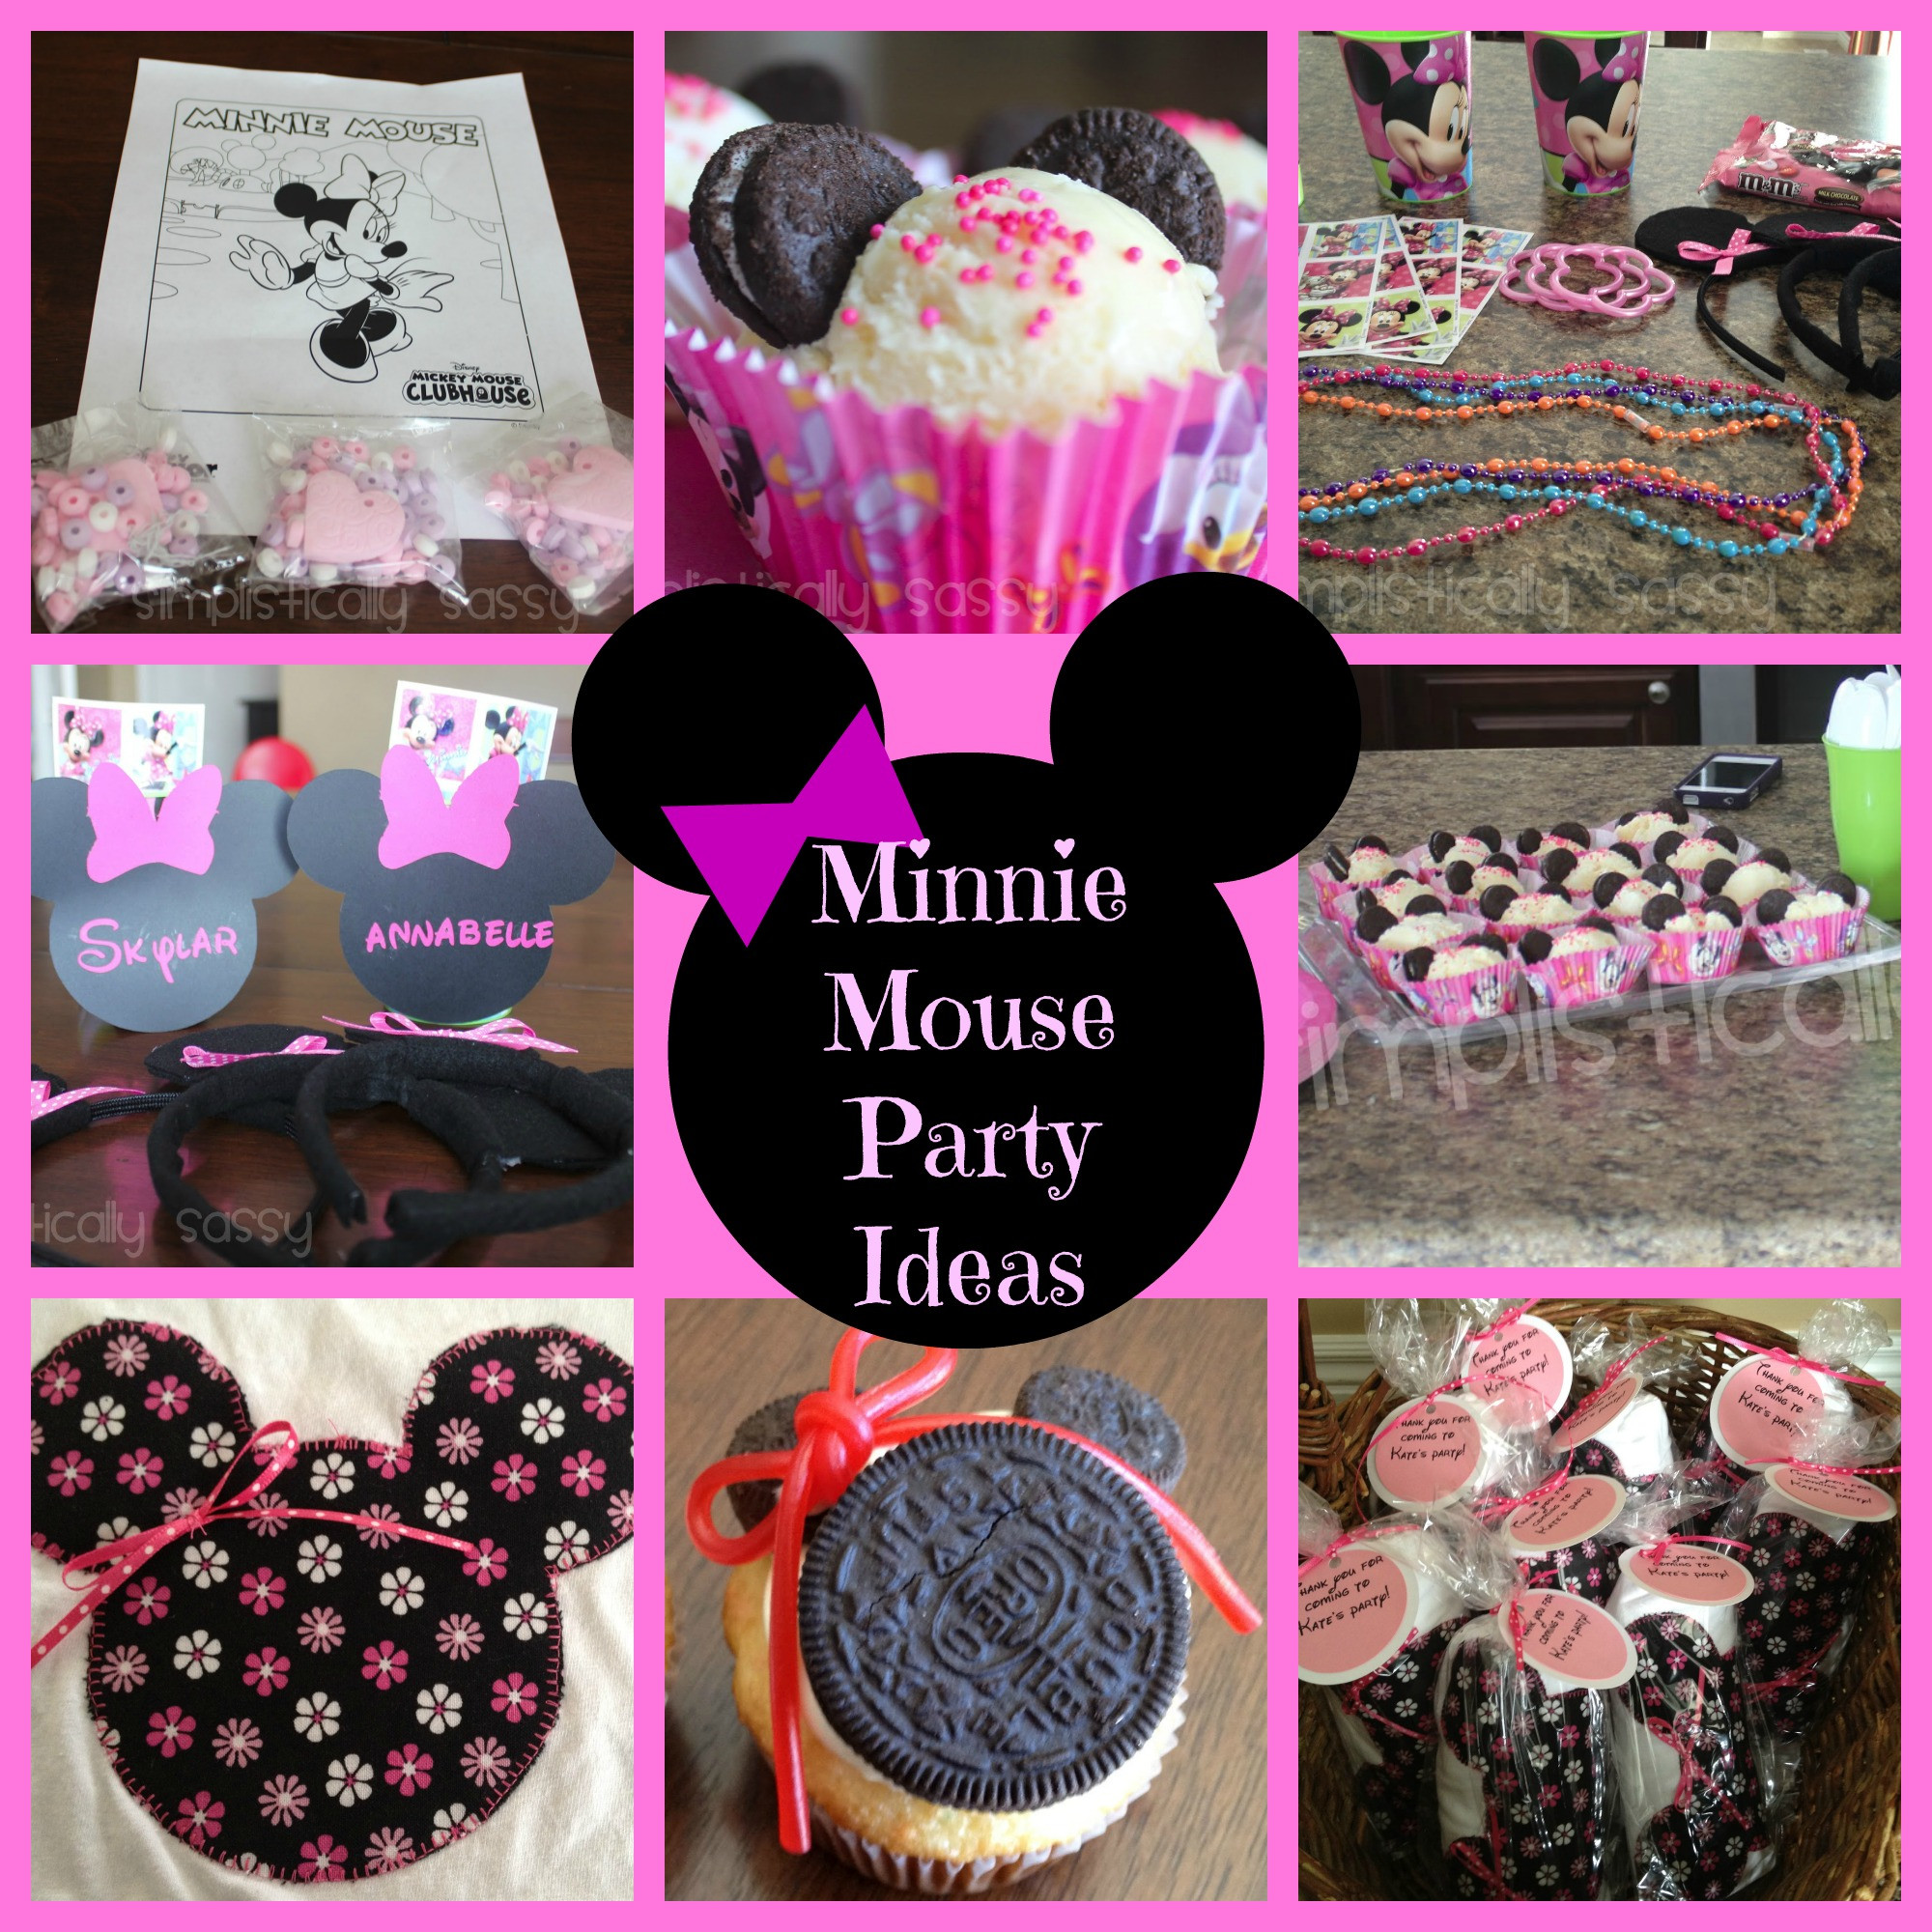 Minnie Birthday Party
 Minnie Mouse Party Ideas events to CELEBRATE